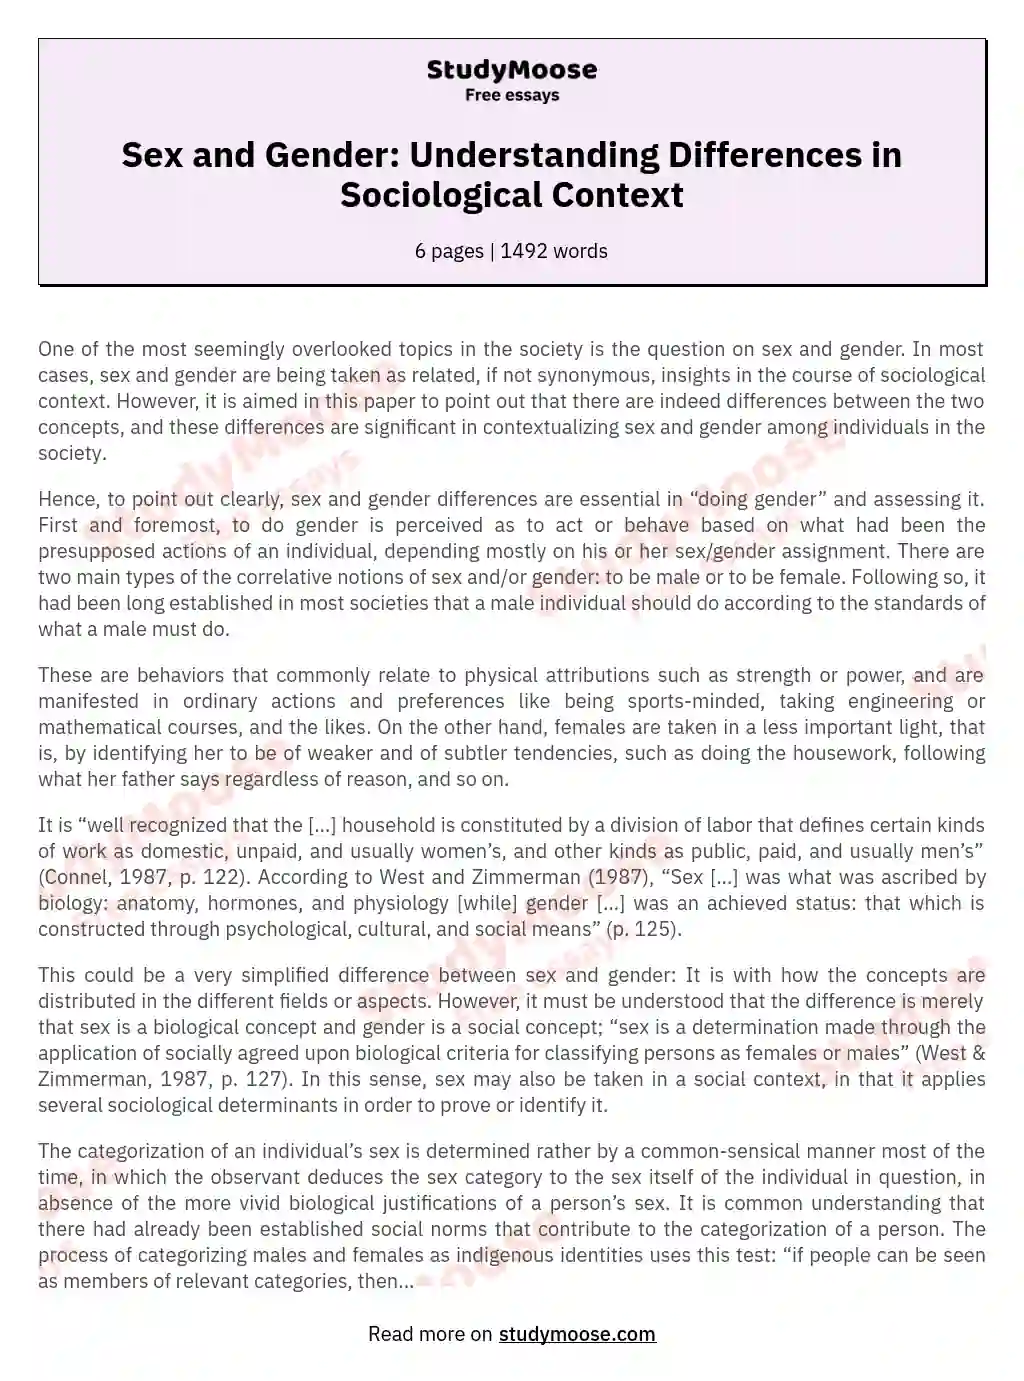 Sex and Gender: Understanding Differences in Sociological Context essay